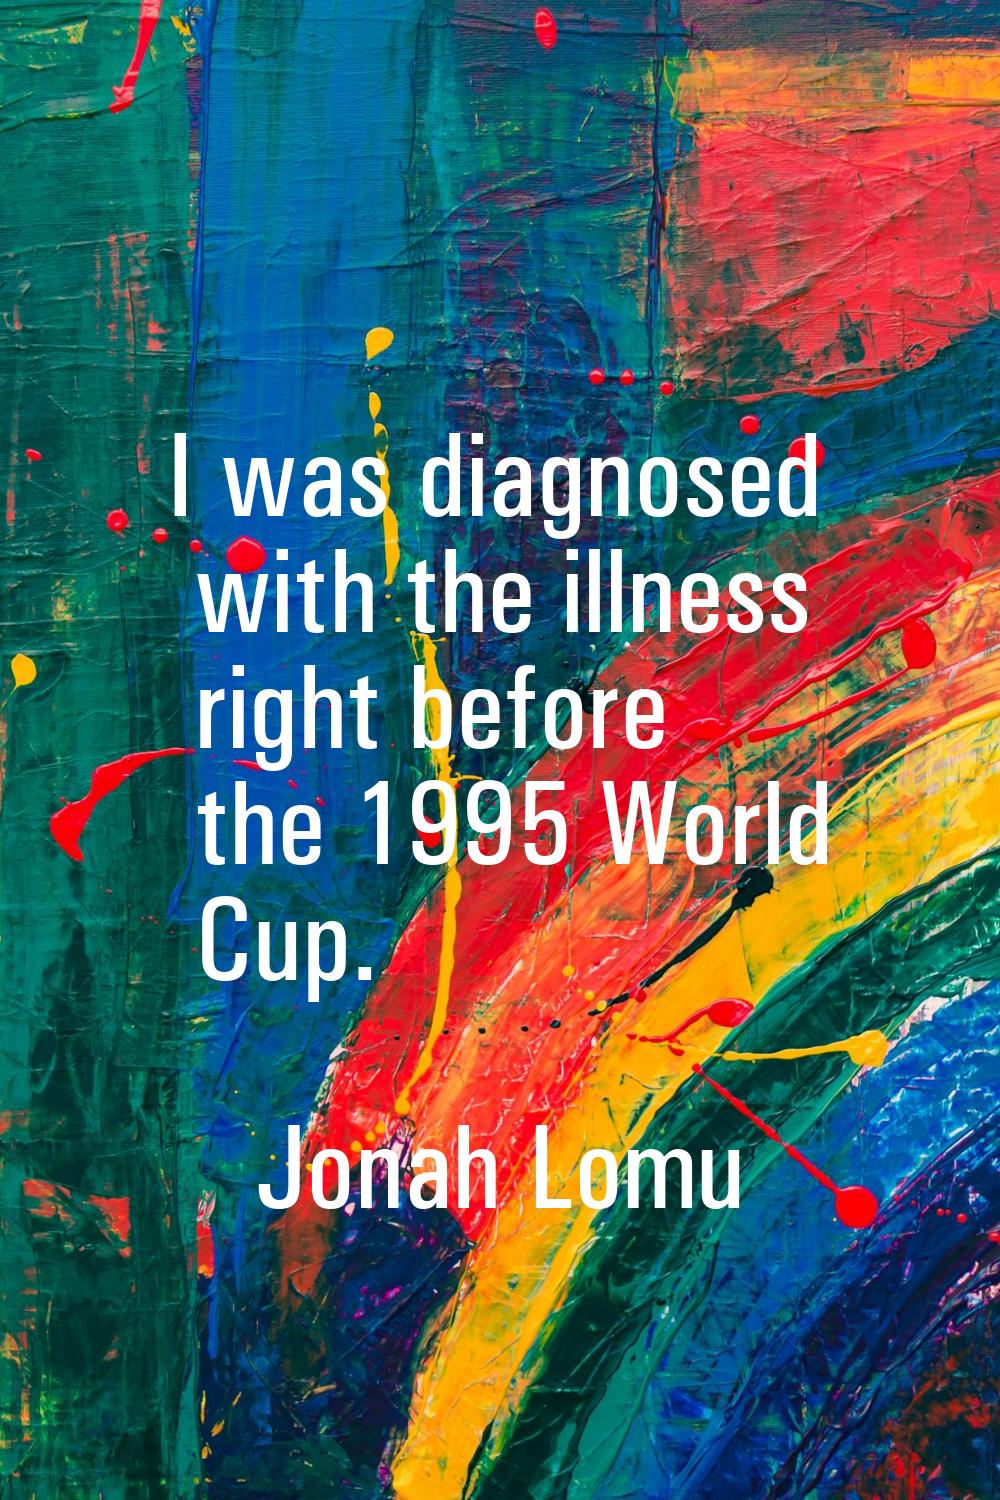 I was diagnosed with the illness right before the 1995 World Cup.